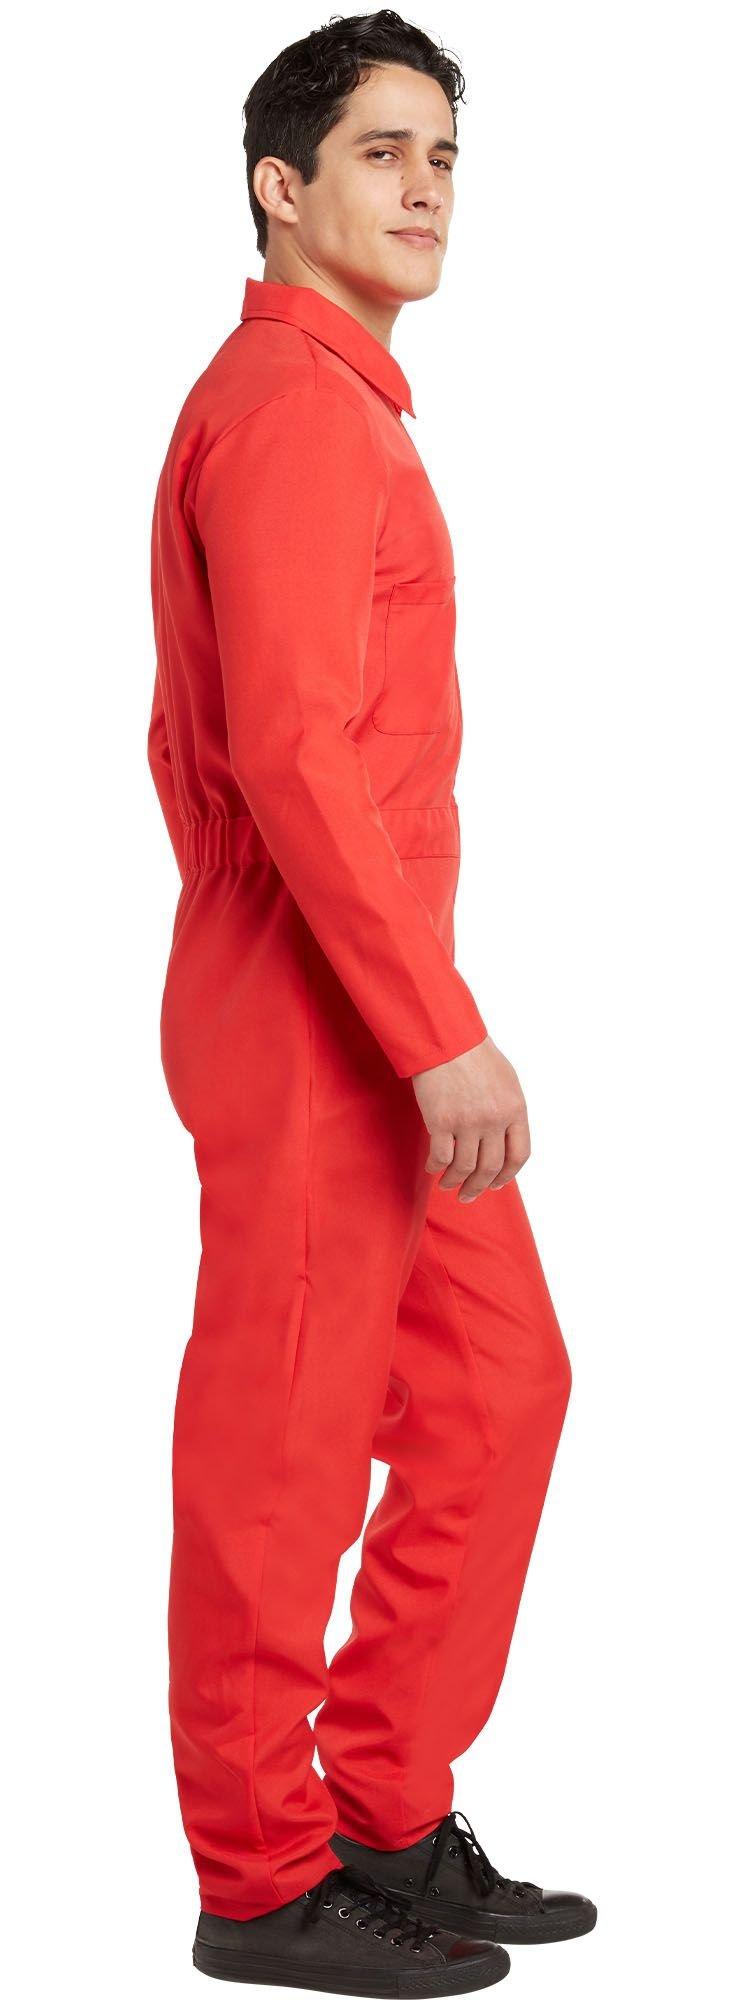 Adult Red Horror Jumpsuit 